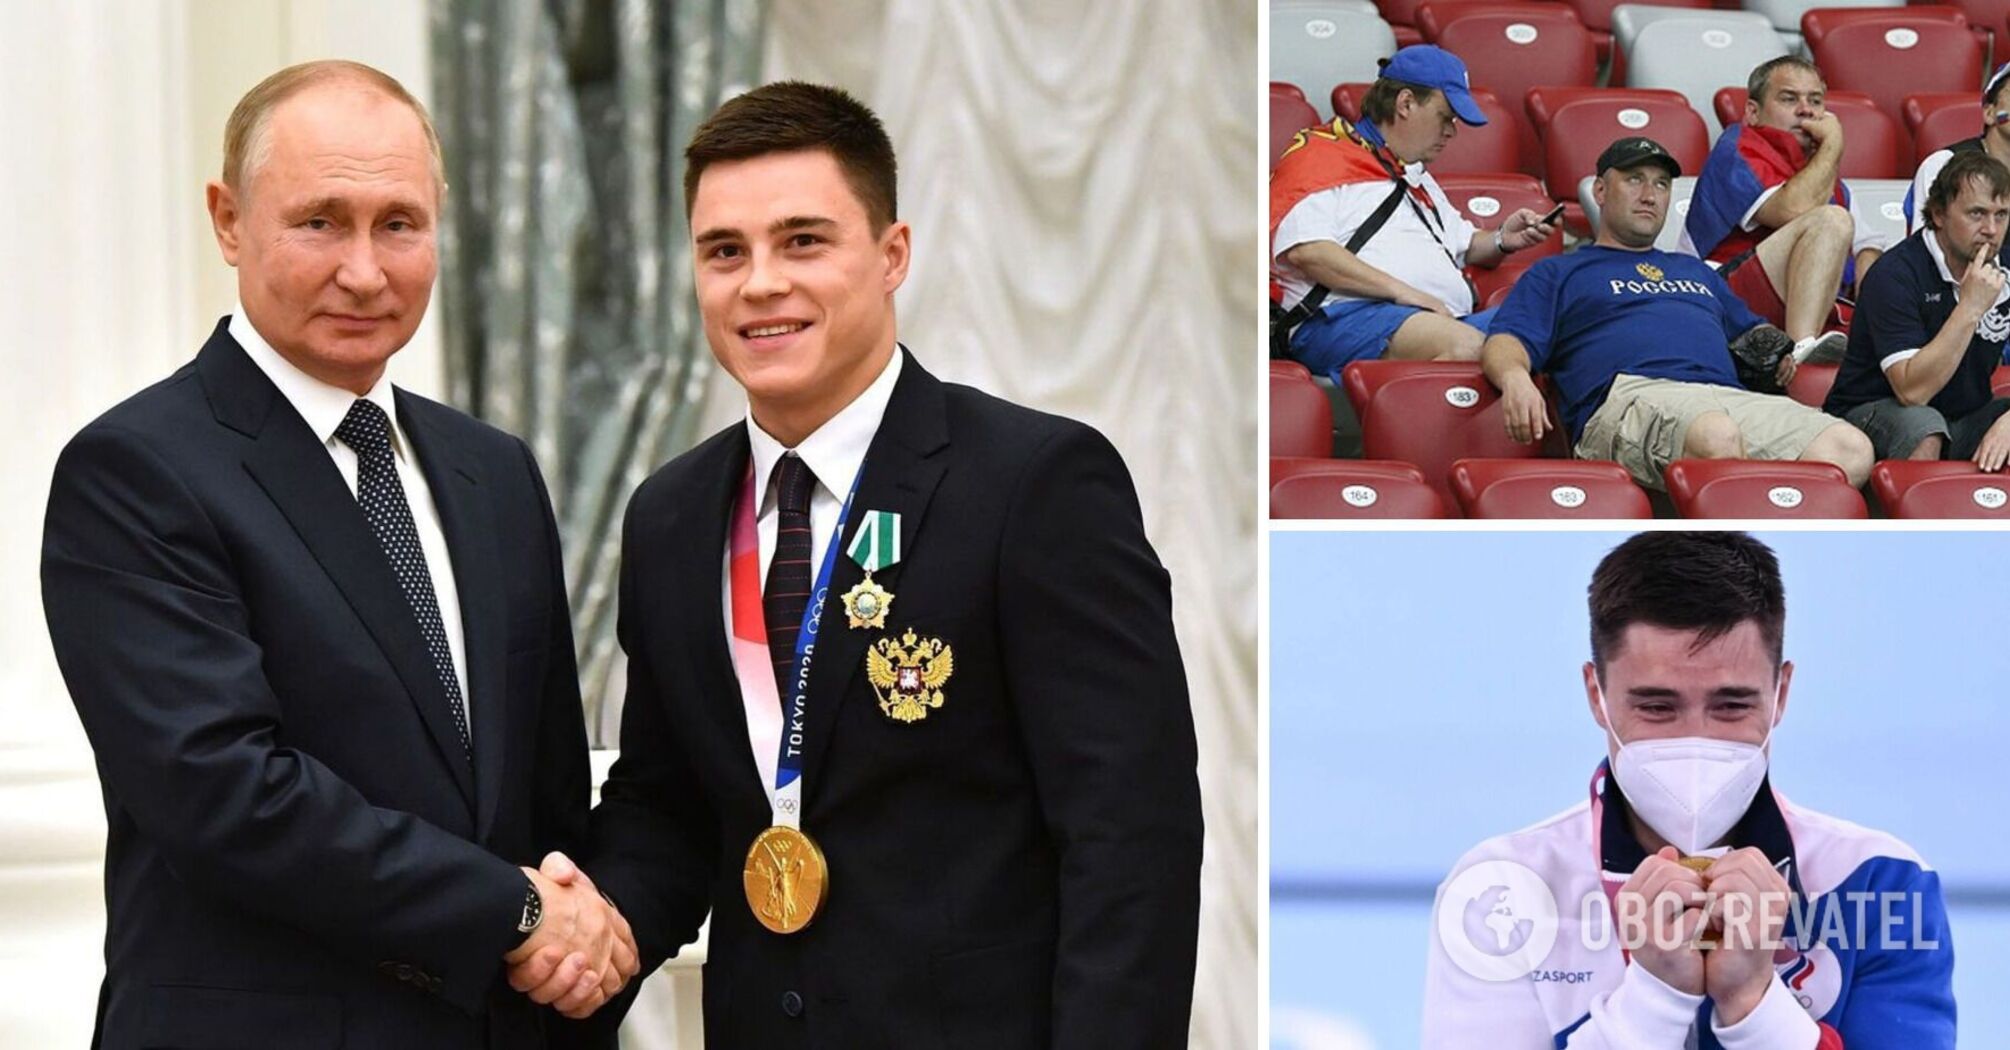 Russian Olympic champion says '99% of the world is in favor of Russia's return', becoming a laughingstock online